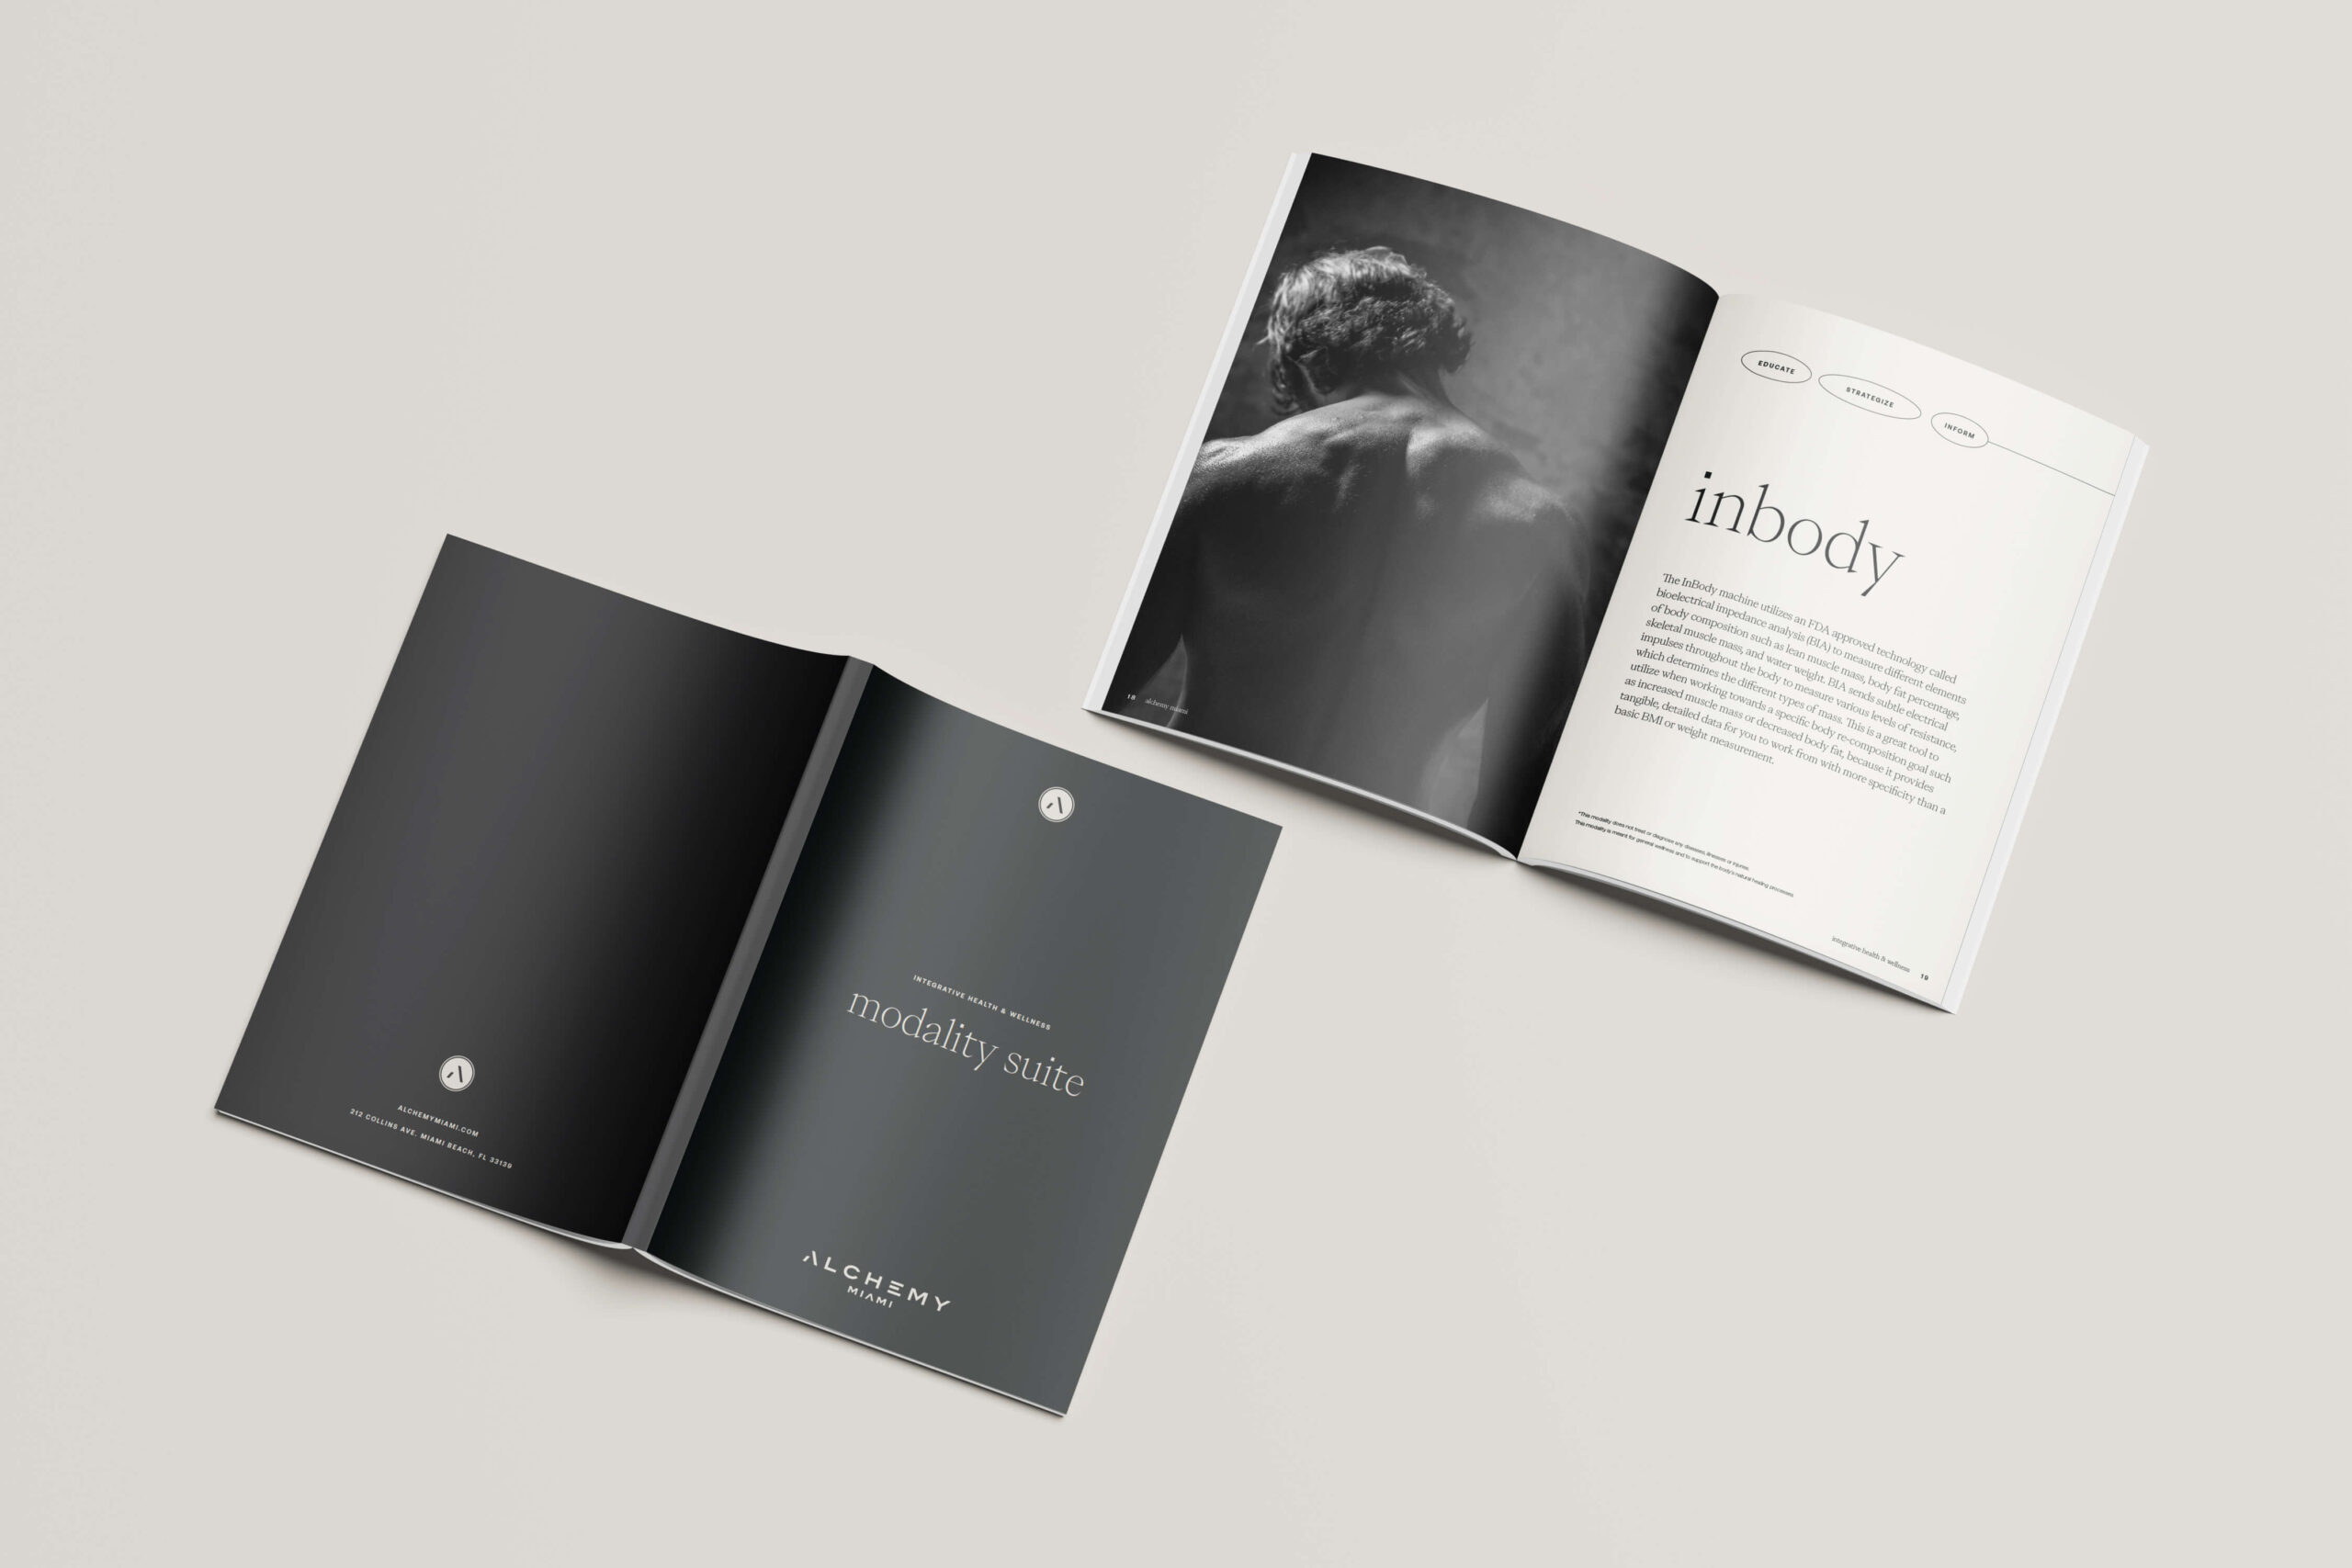 Alchemy Modality Suite booklet